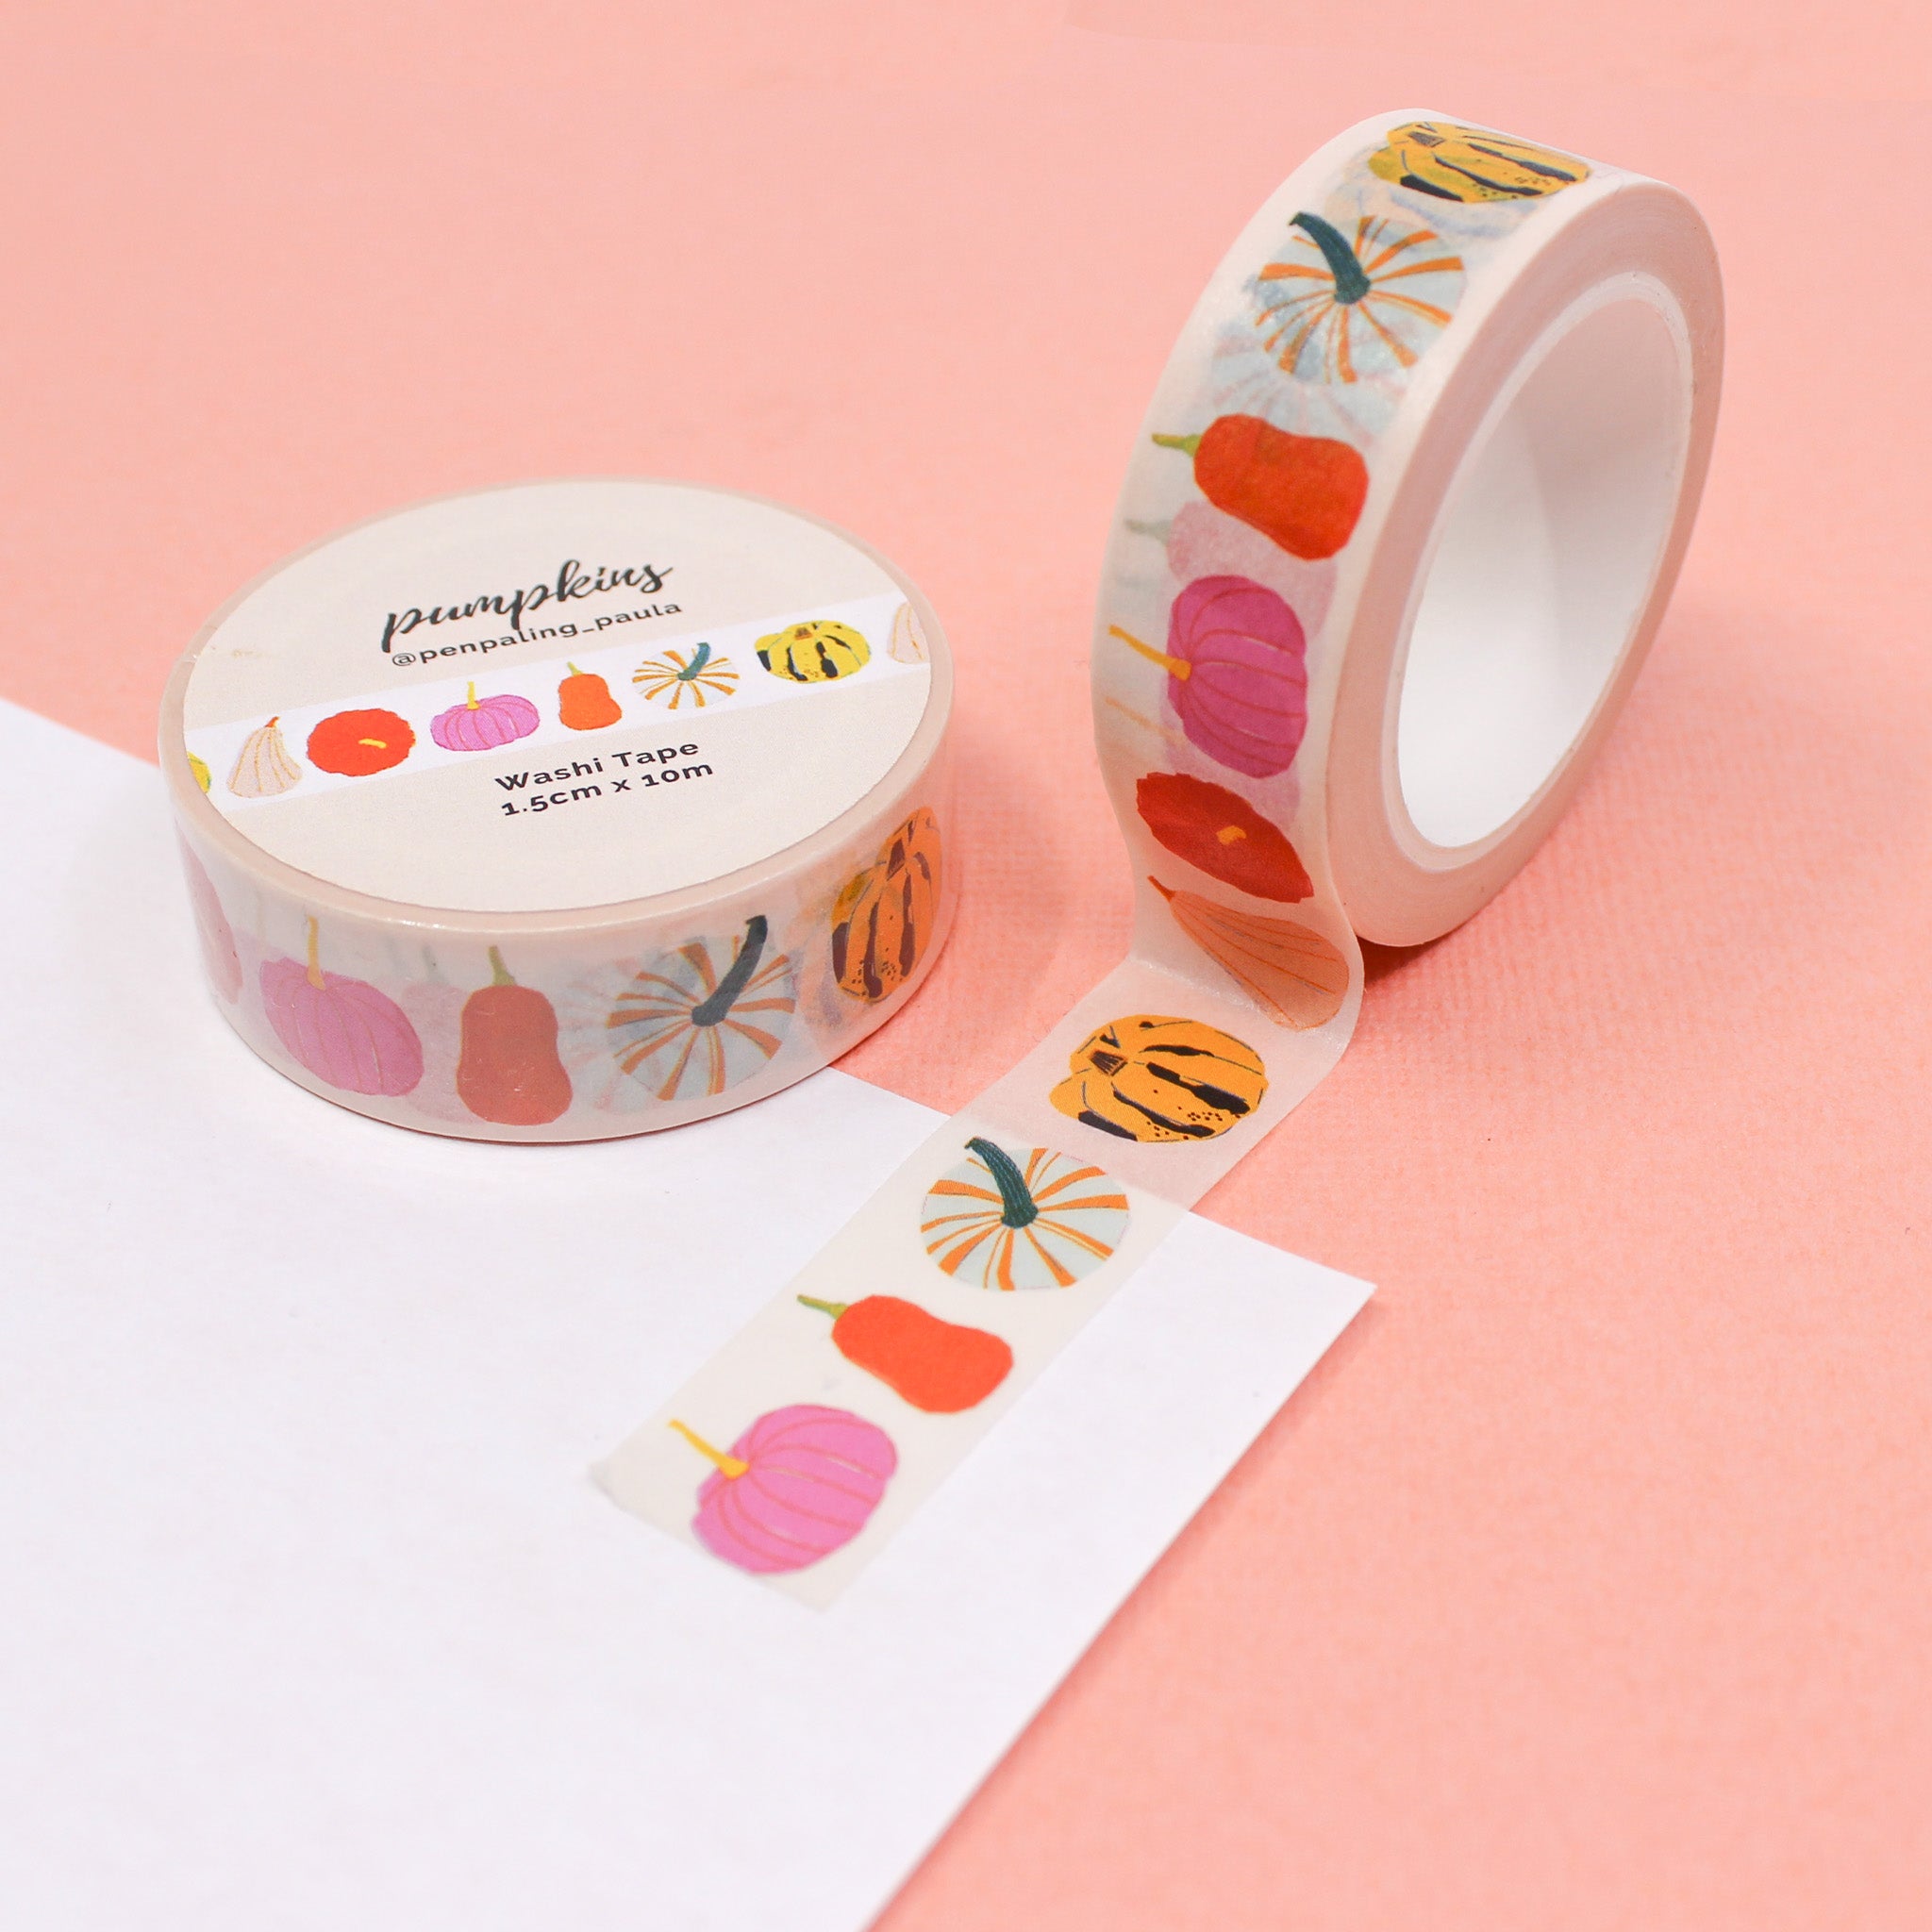 This is a pumpkin and gourds pattern washi tape from BBB Supplies Craft Shop